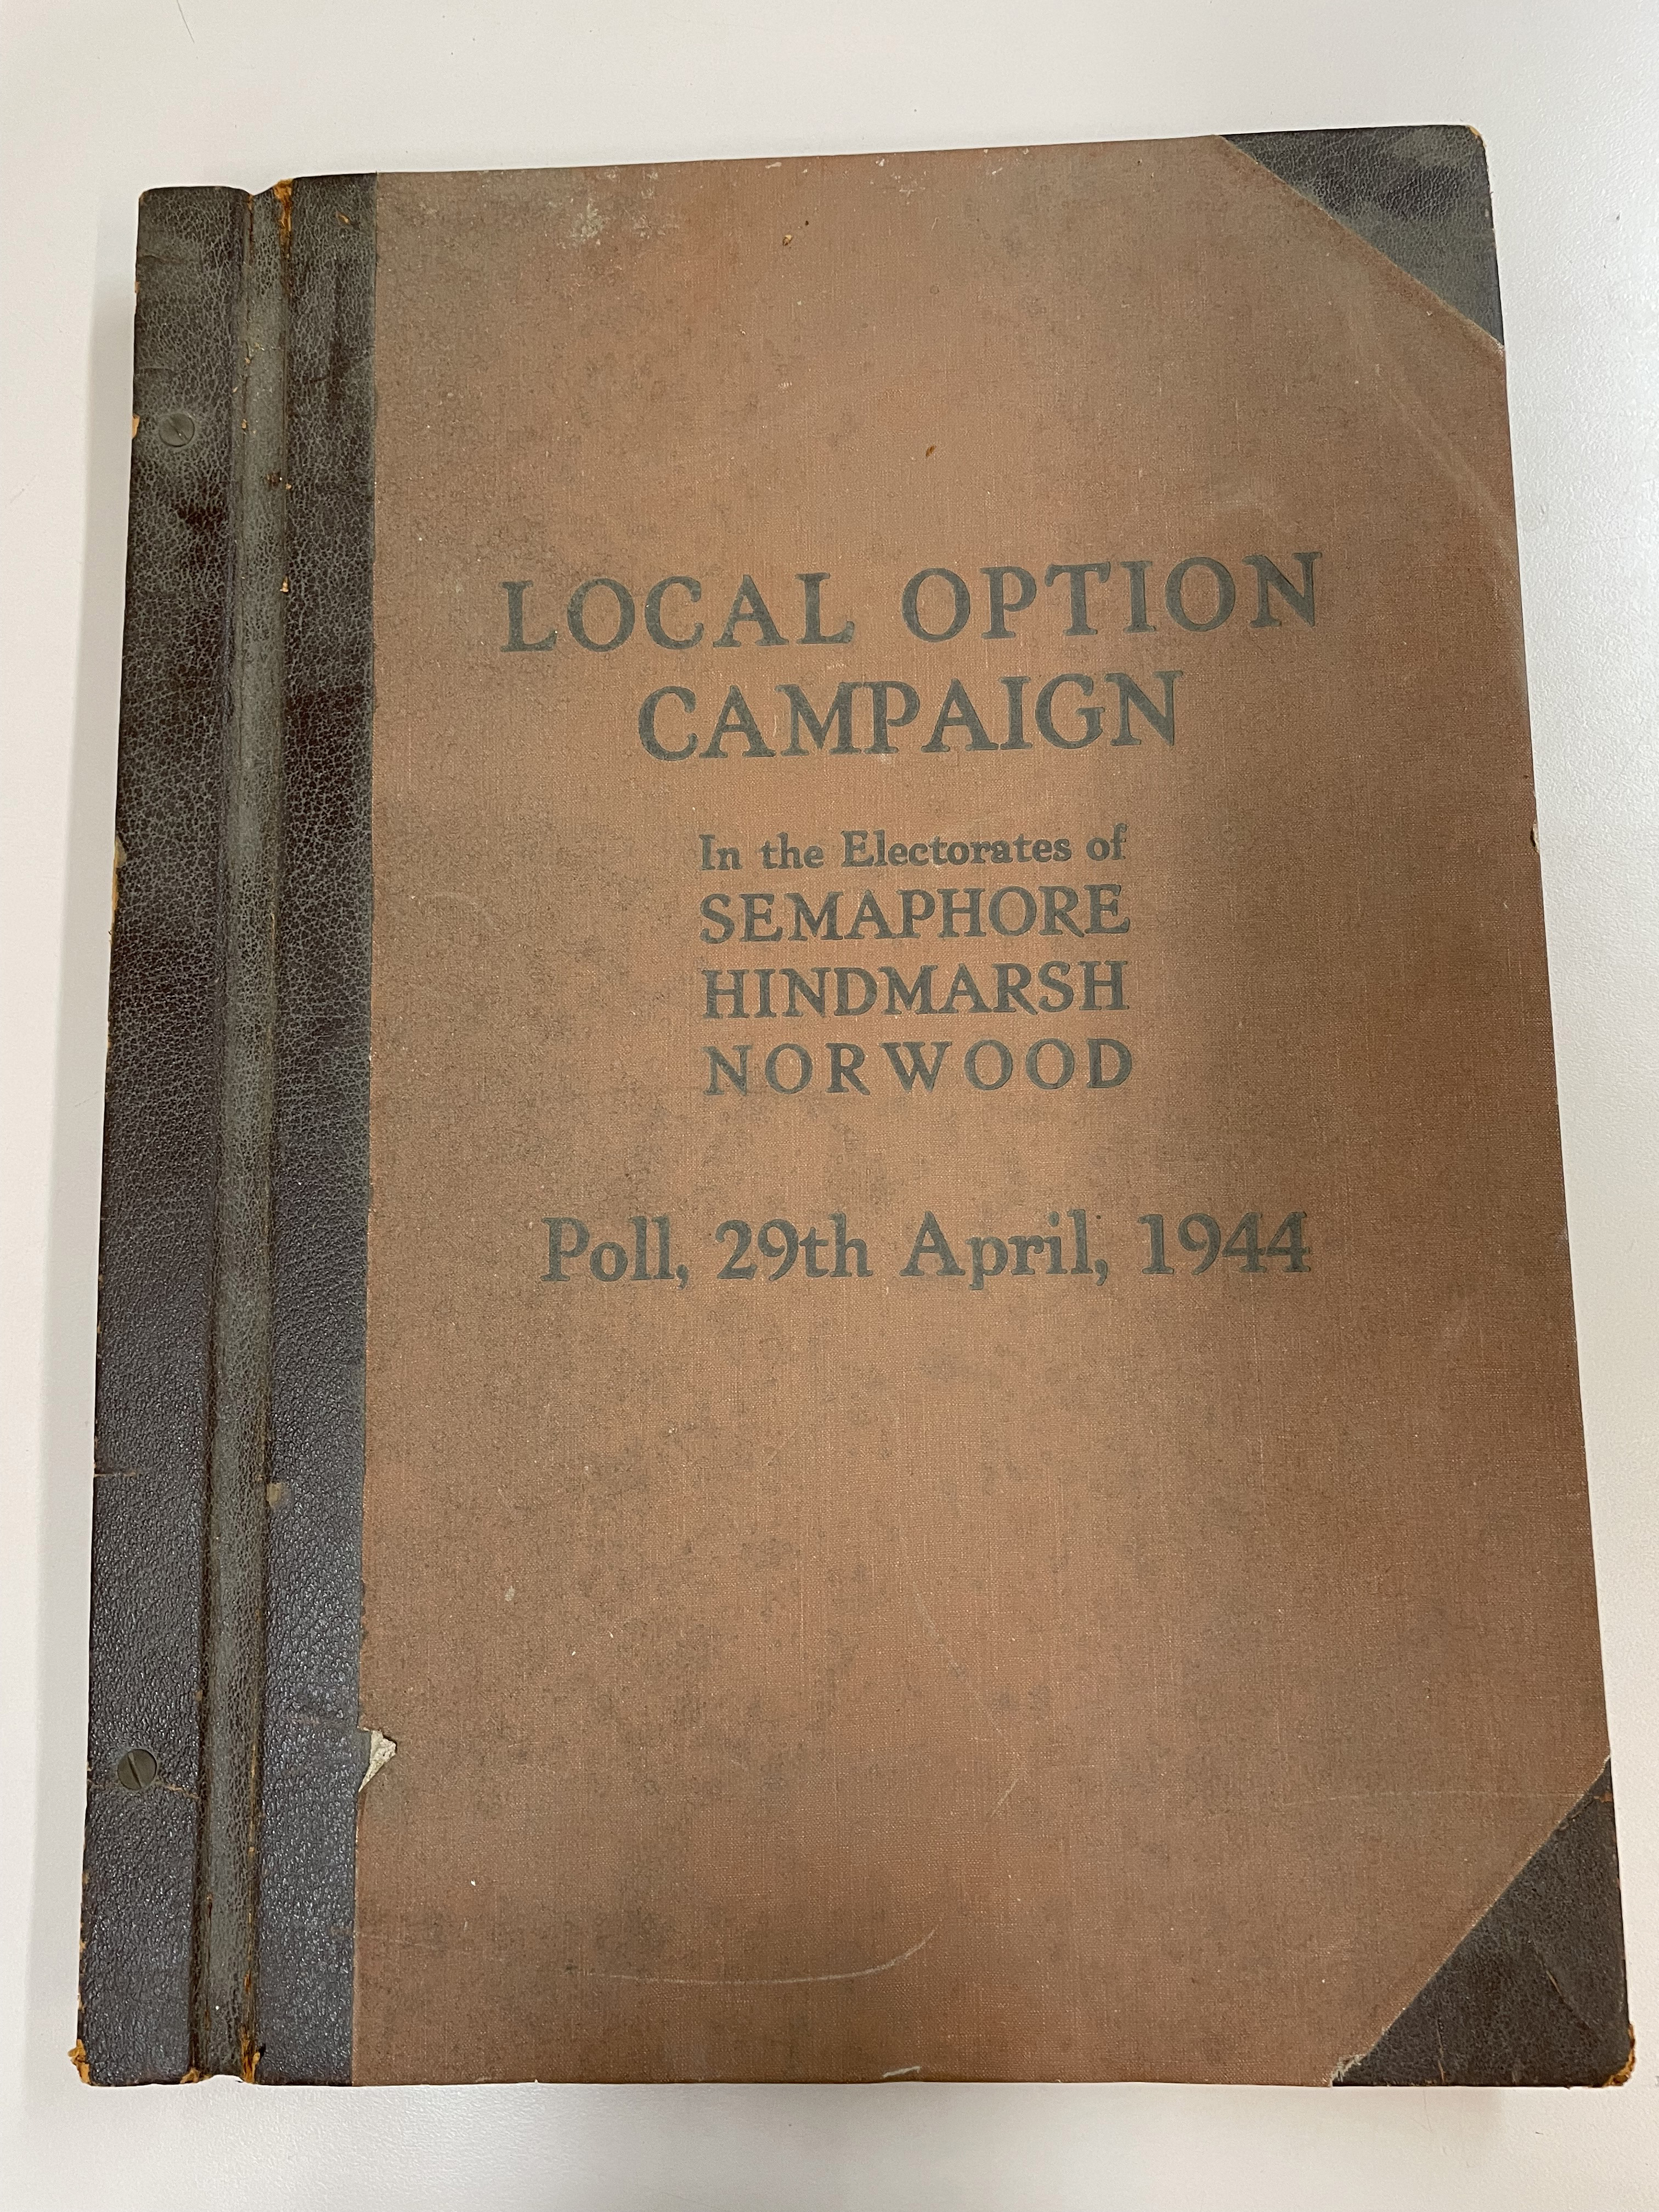 Local option campaign book, as received by the State Library of SA.